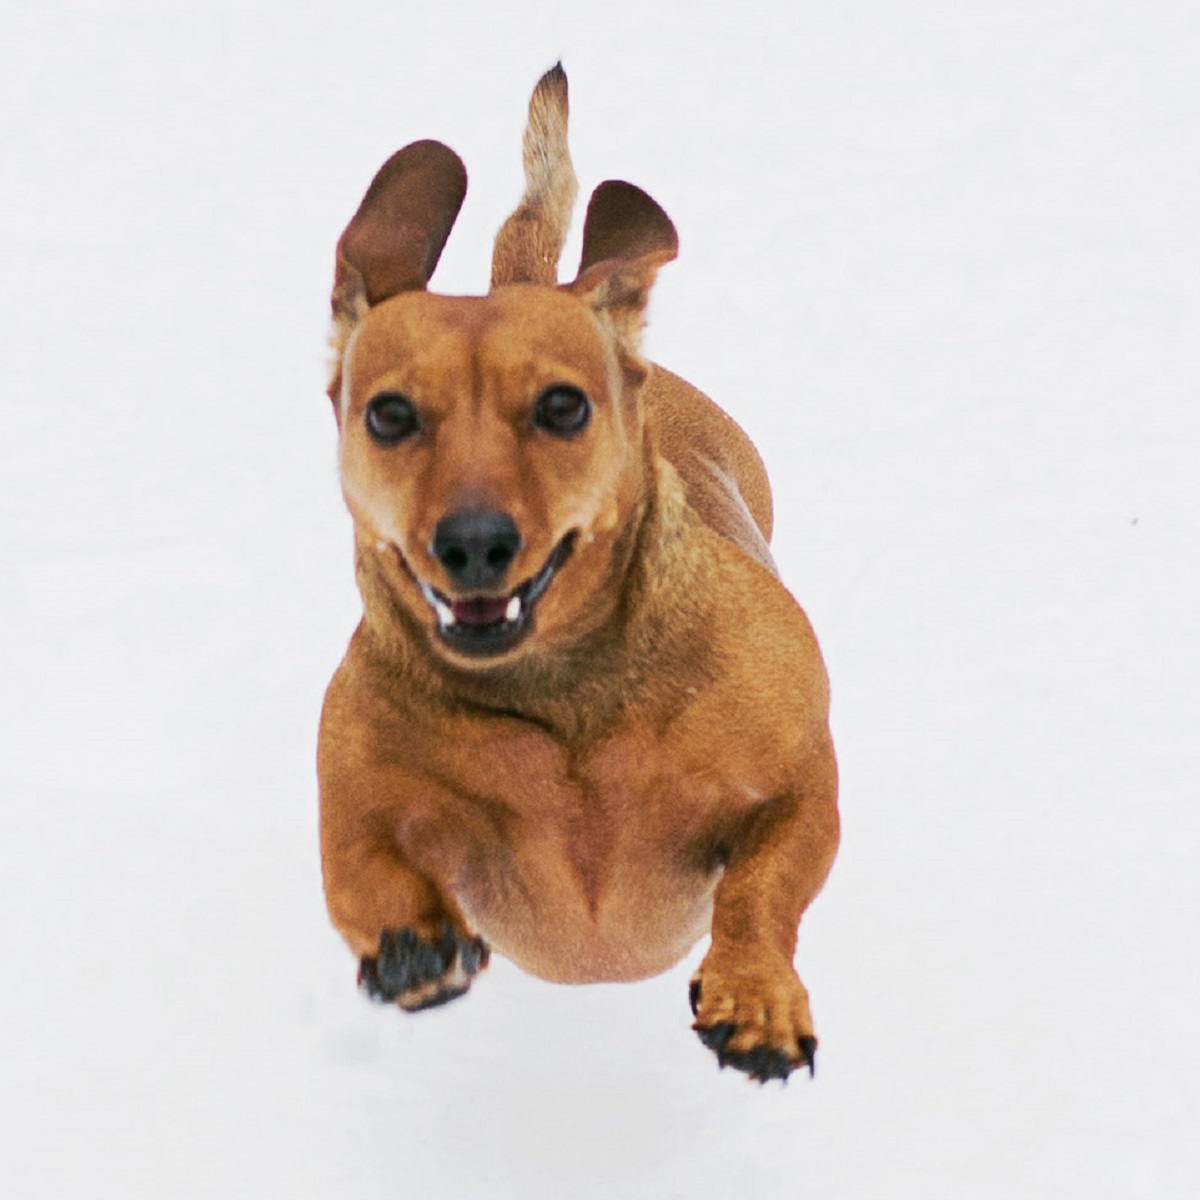 funny-dachshund-dog-running-photo-captured-in-mid-air-against-solid-white-background